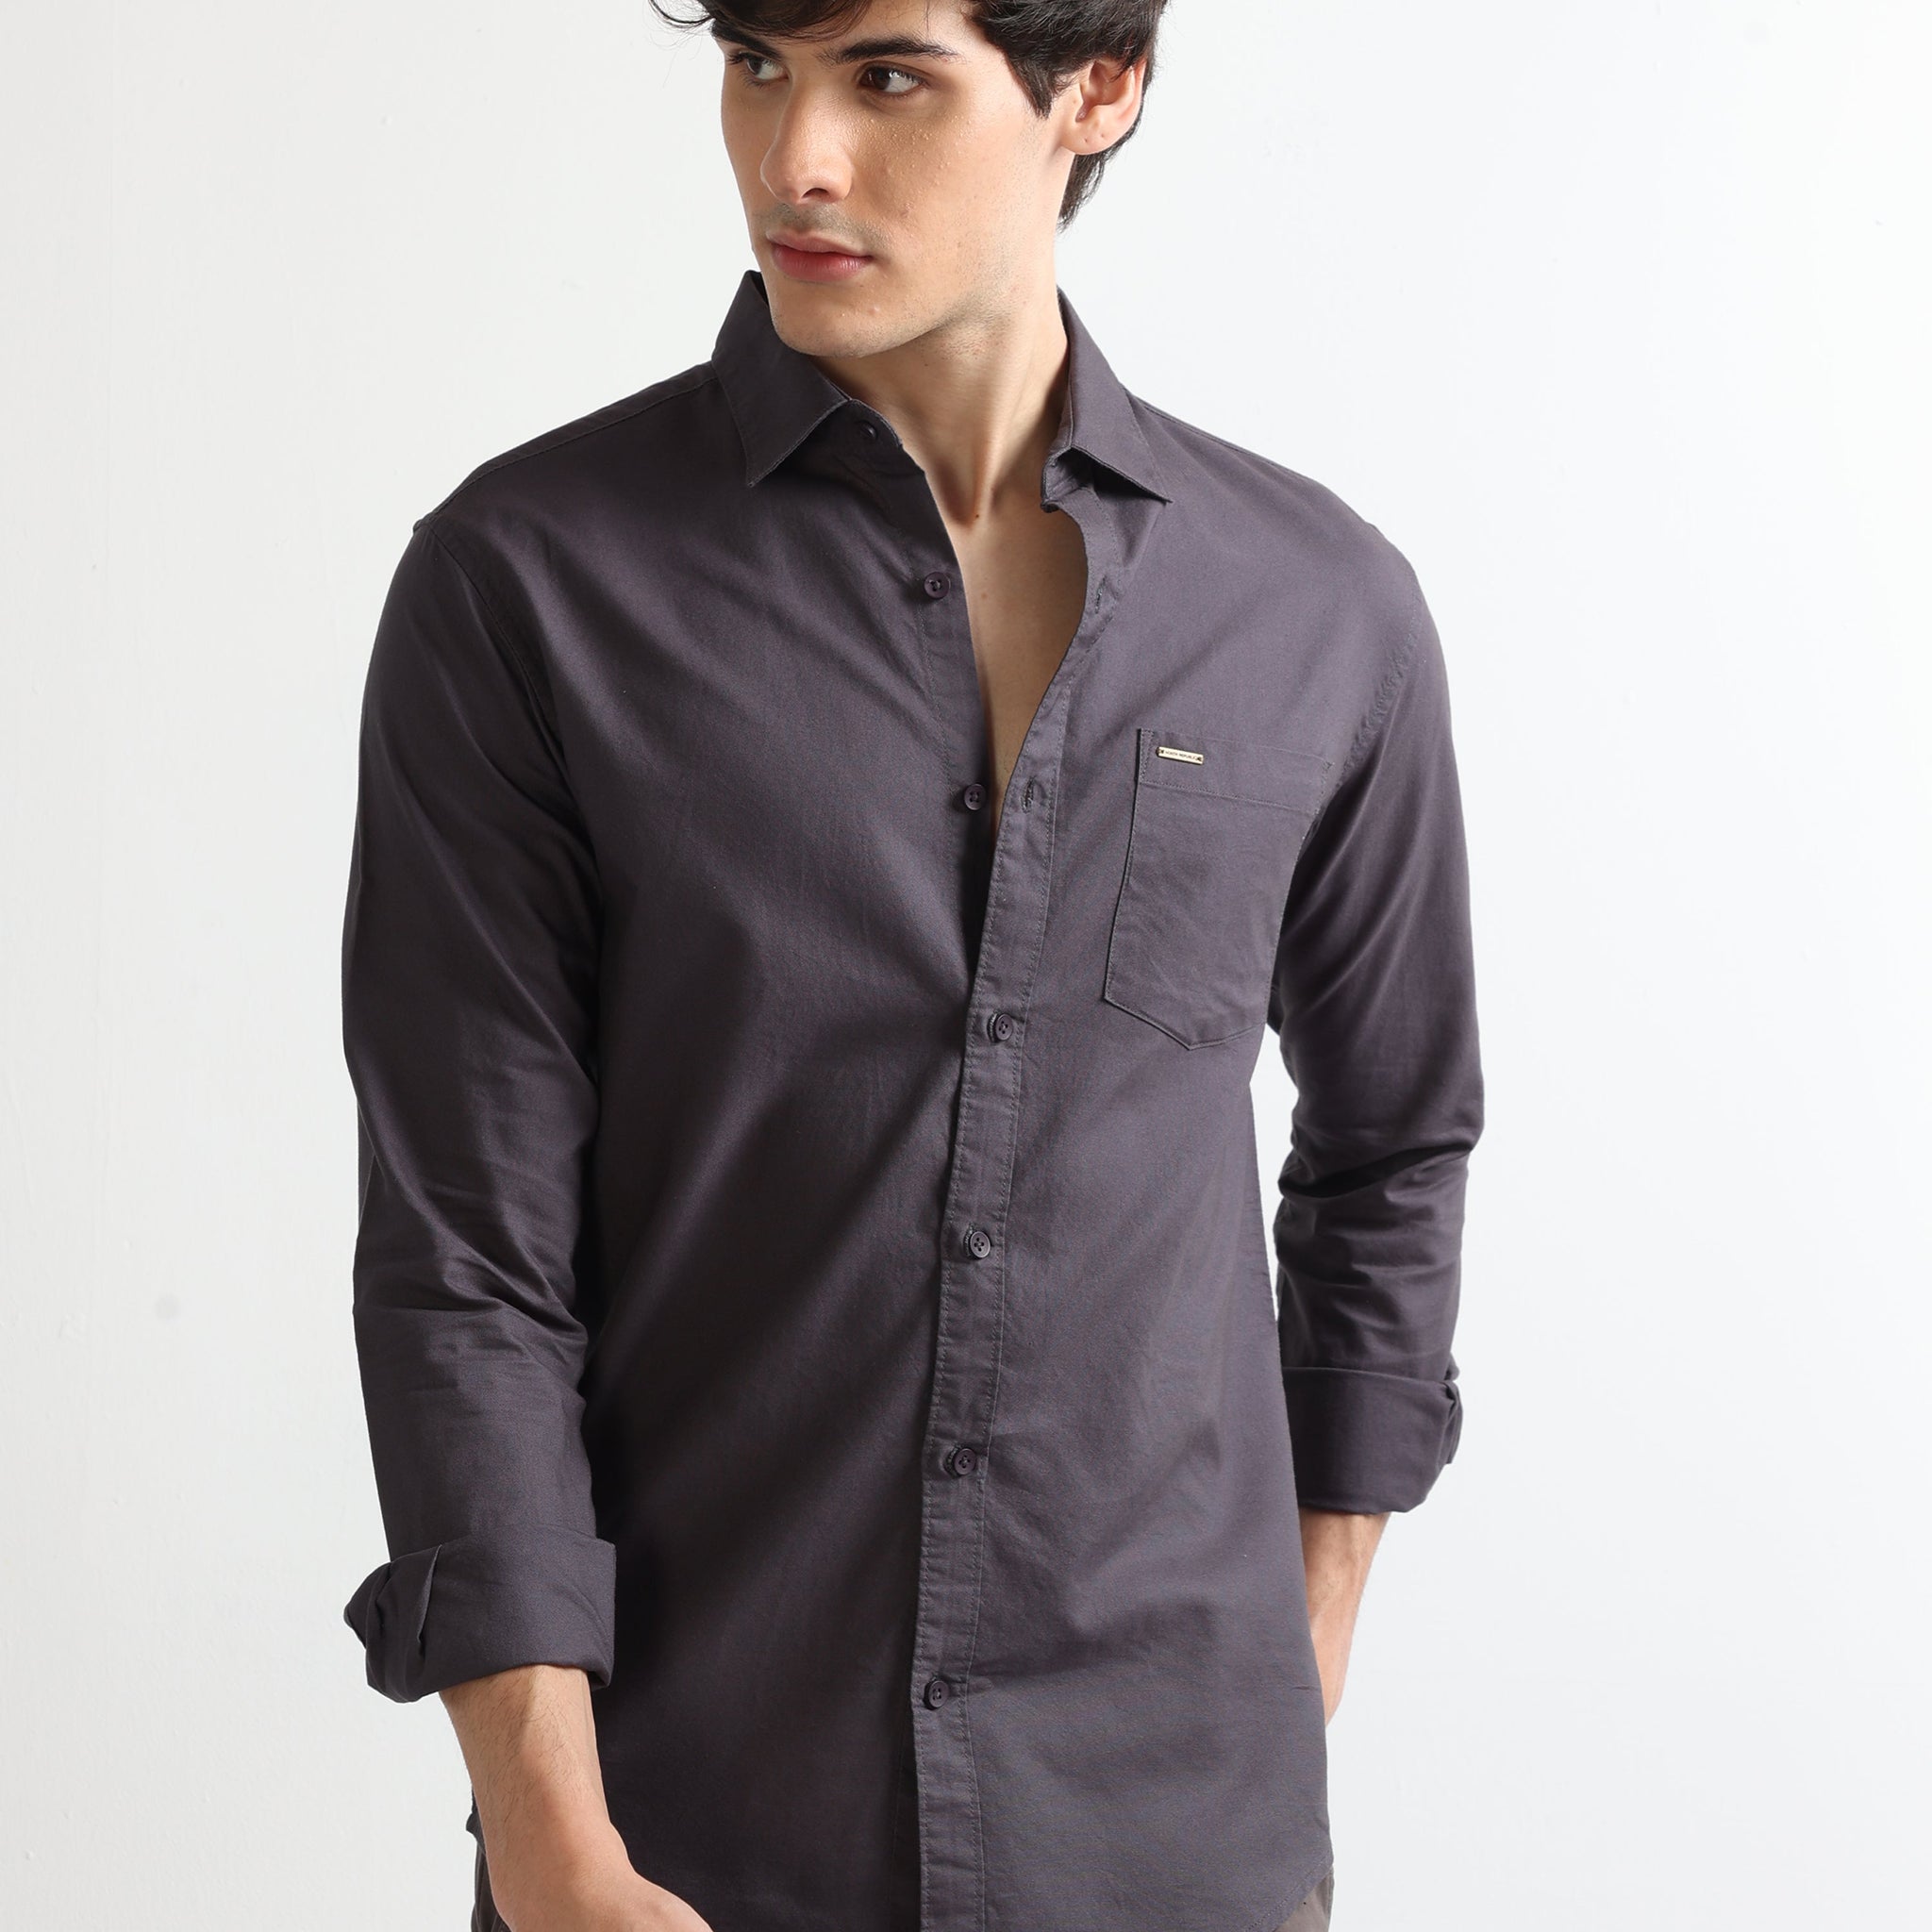 Buy Solid Full Sleeves Shirt For Work Wear Online